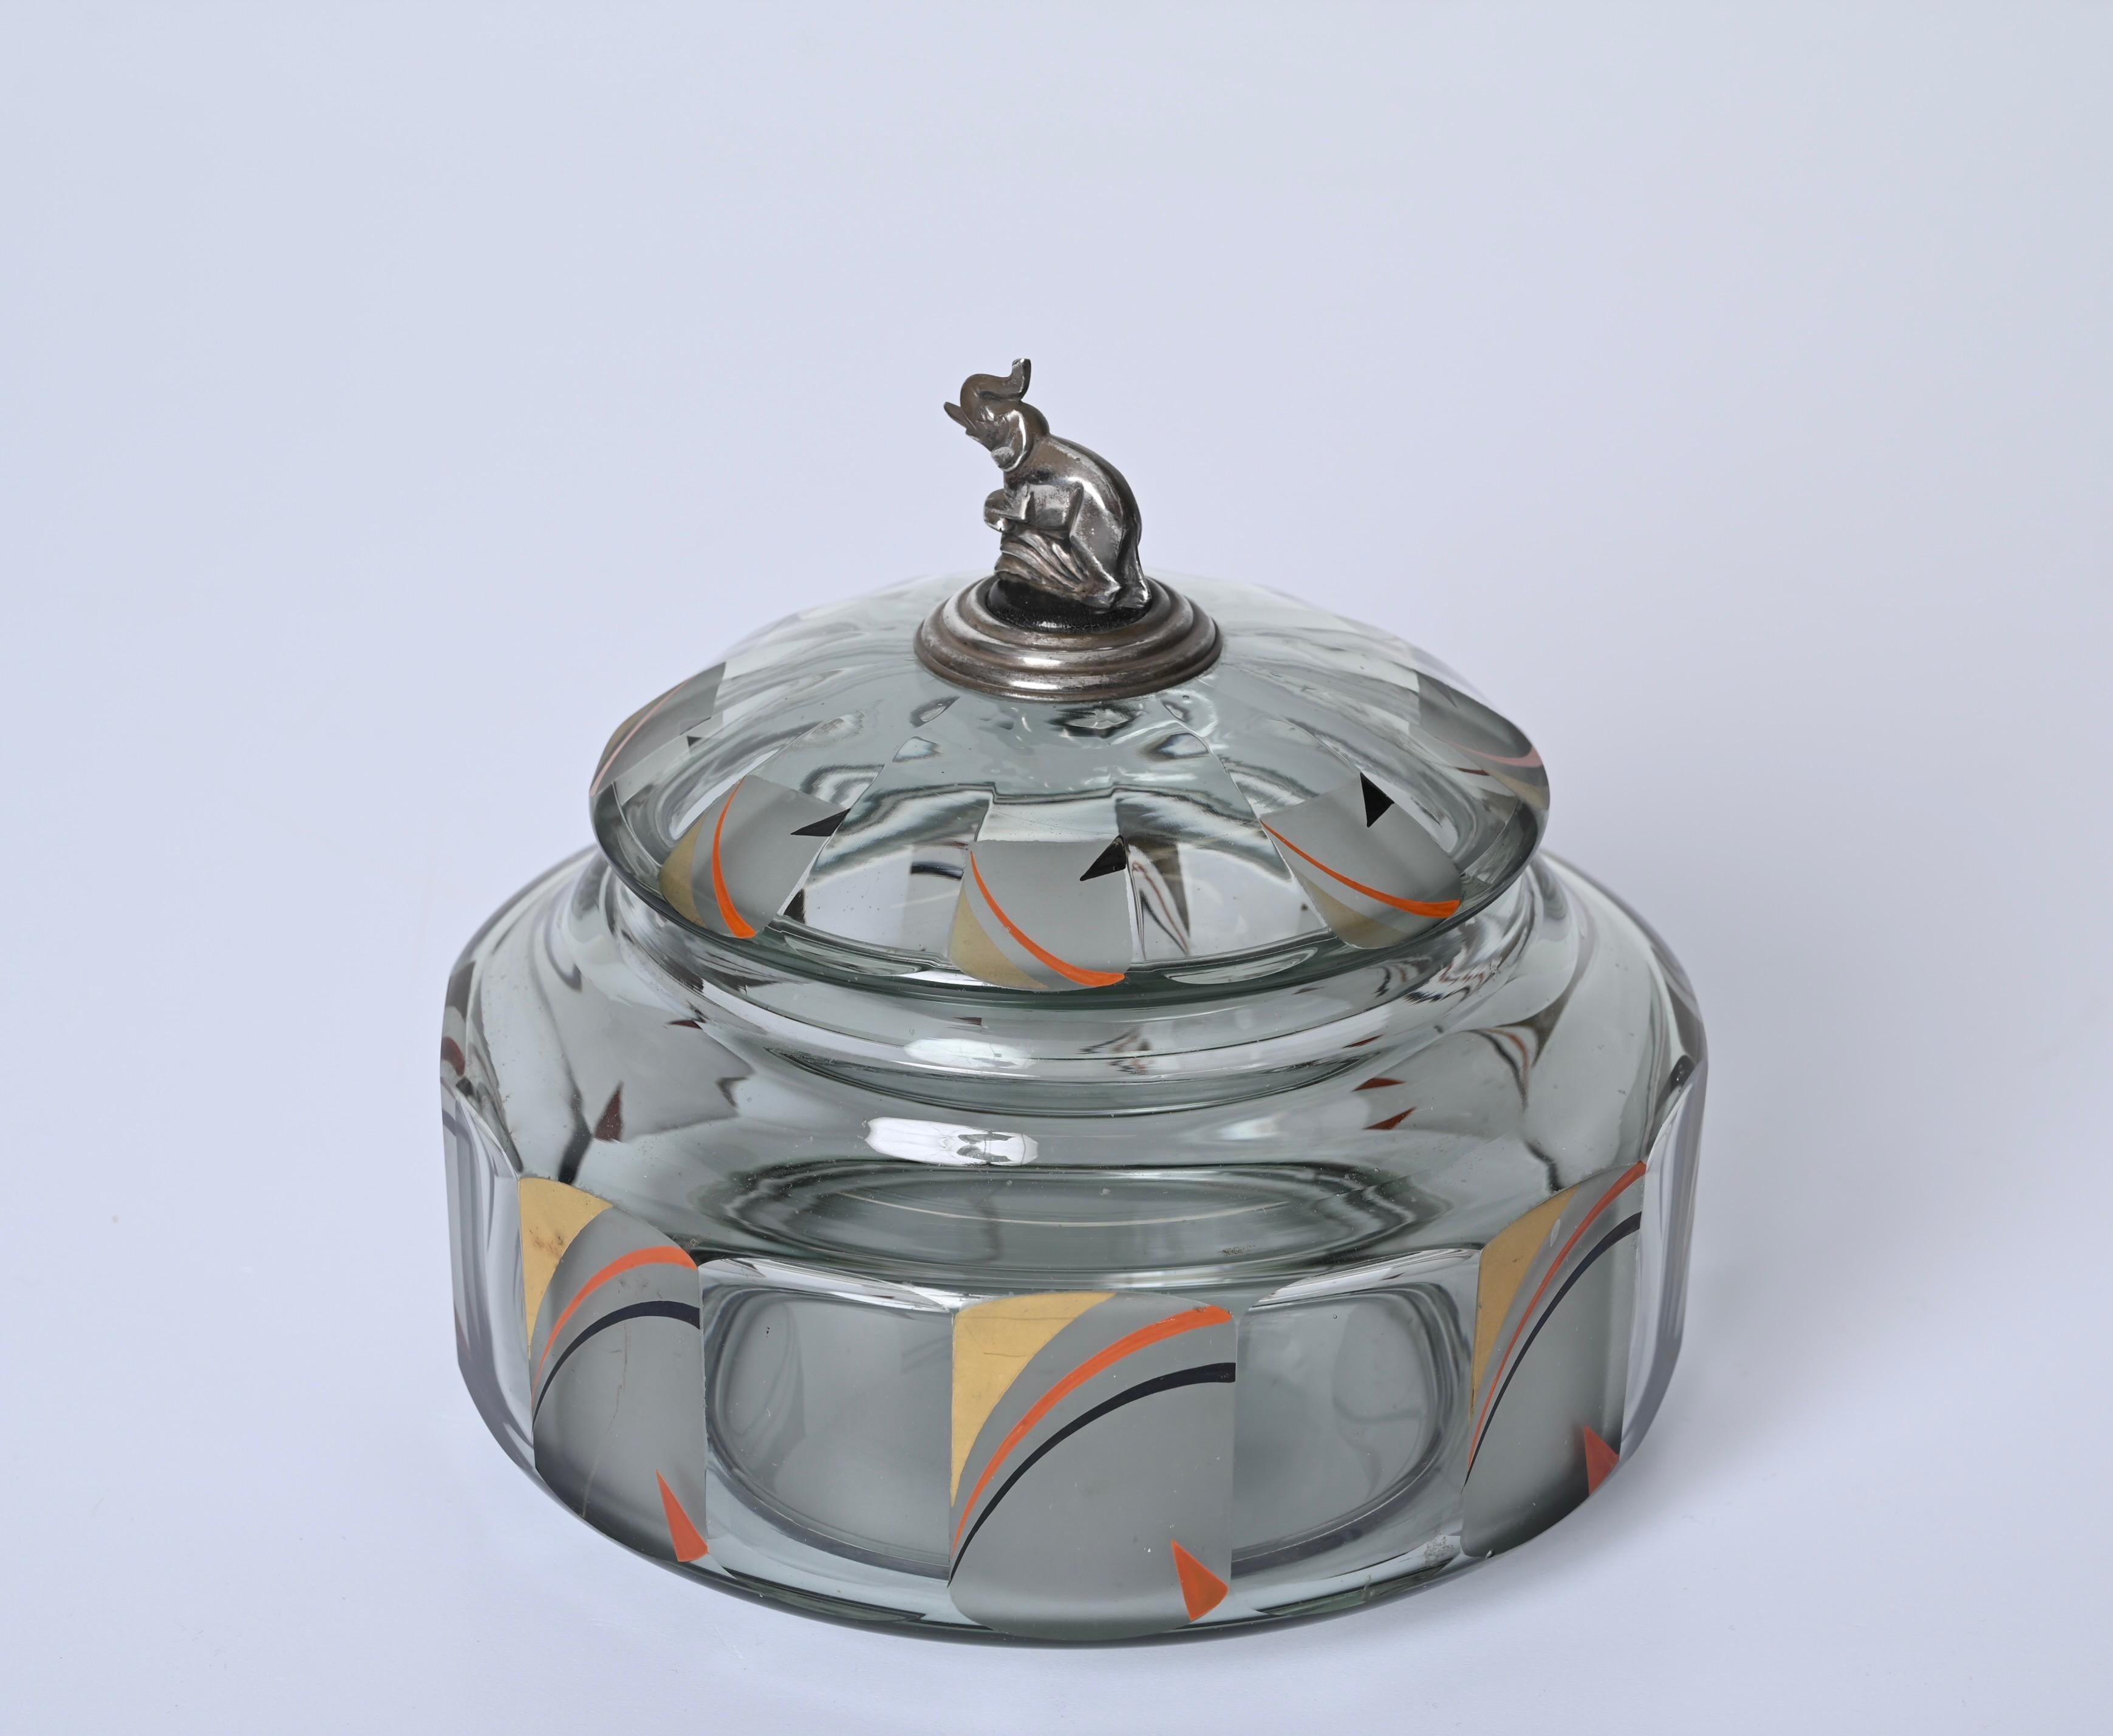 Incredible futurist multifaceted crystal glass box, this stunning piece was produced in Italy in 1933, as it features the 800 silver engraving that was used only in that specific year.

The box features gold, black and orange enameled decorations